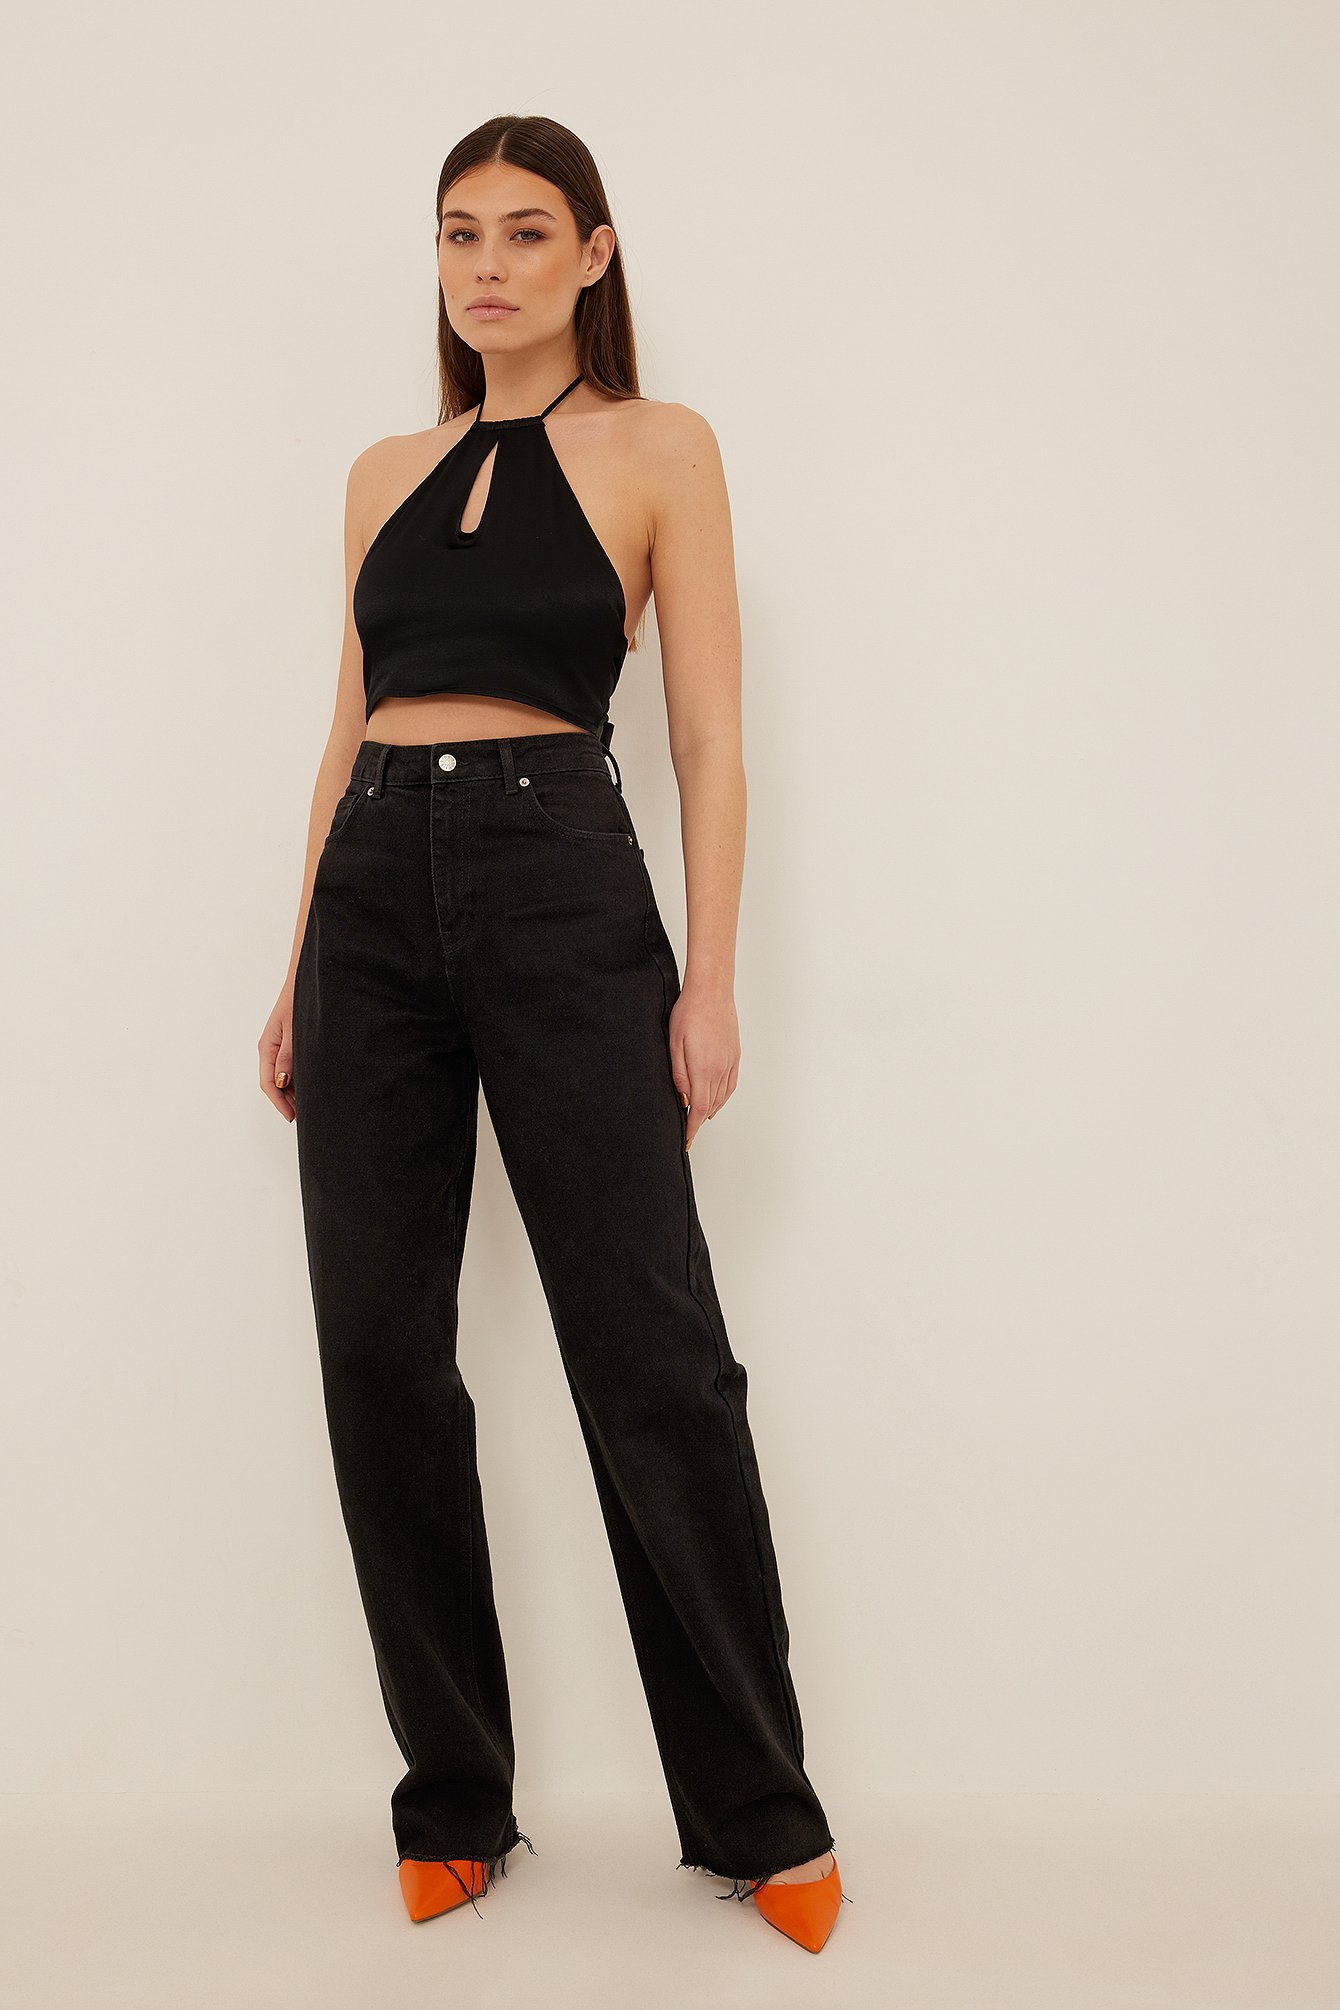 Cropped Halterneck Top Outfit.